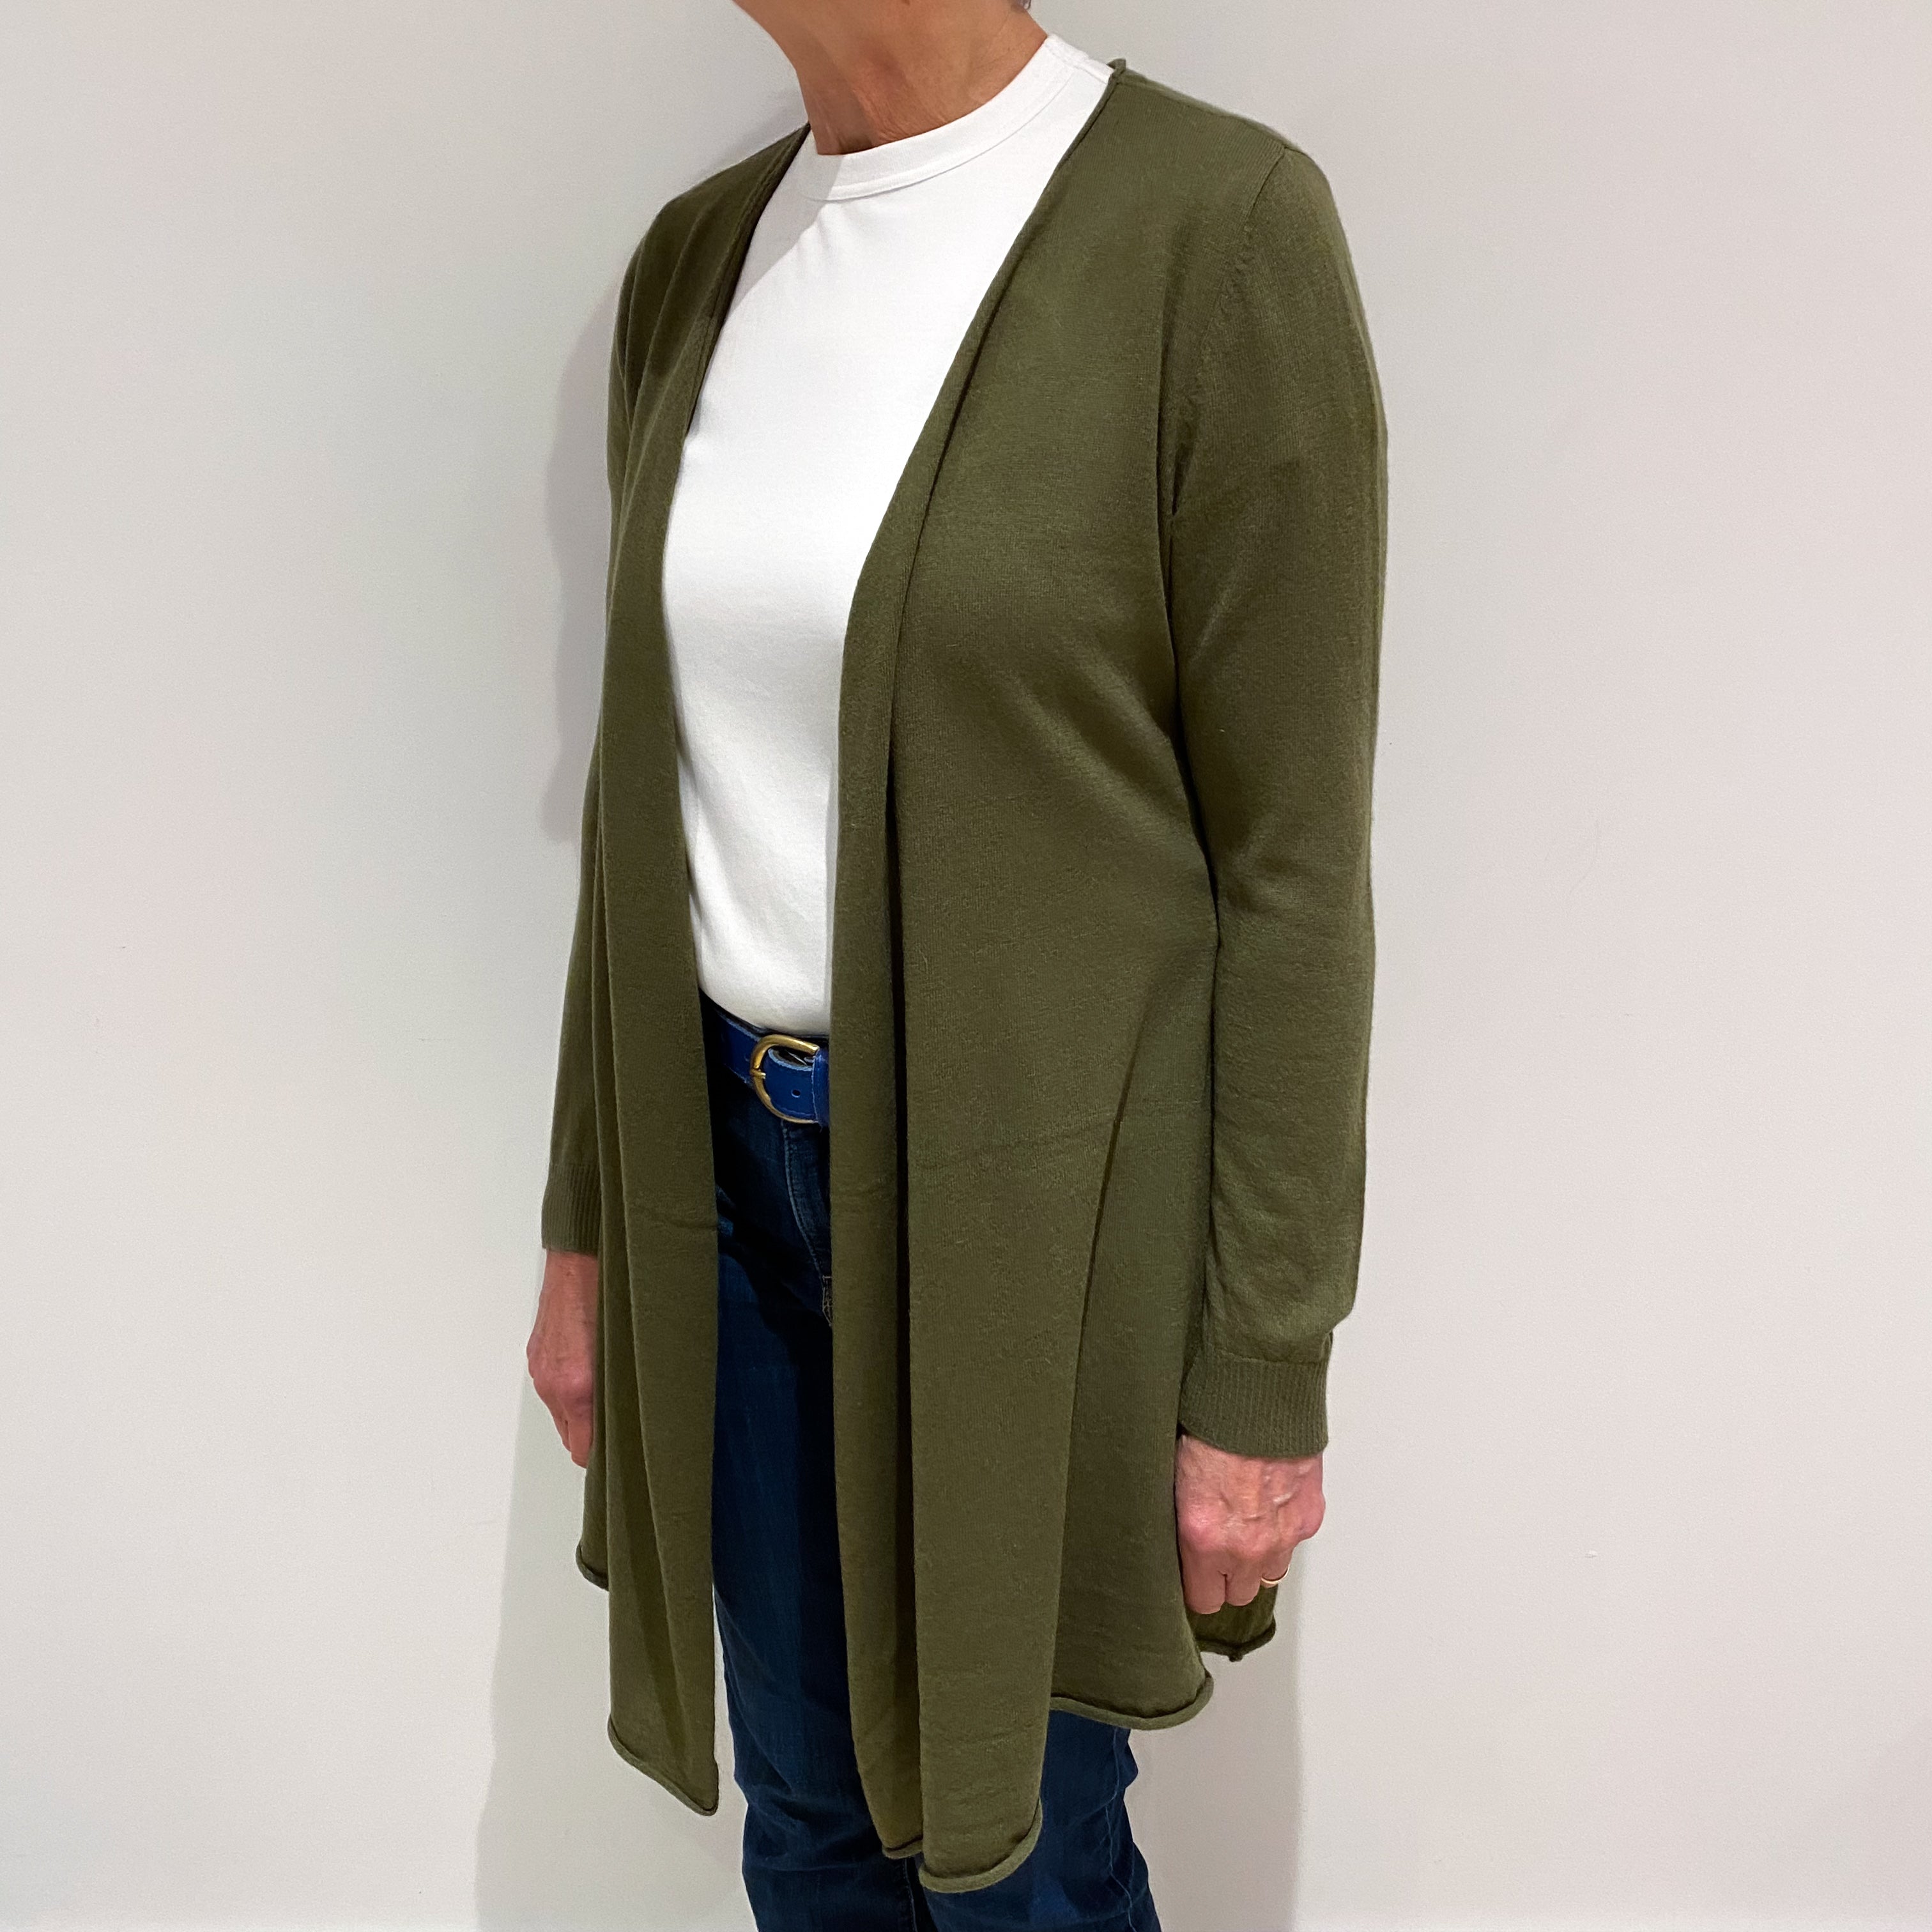 Olive Green Cashmere Waterfall Cardigan with Rolled Hem Medium